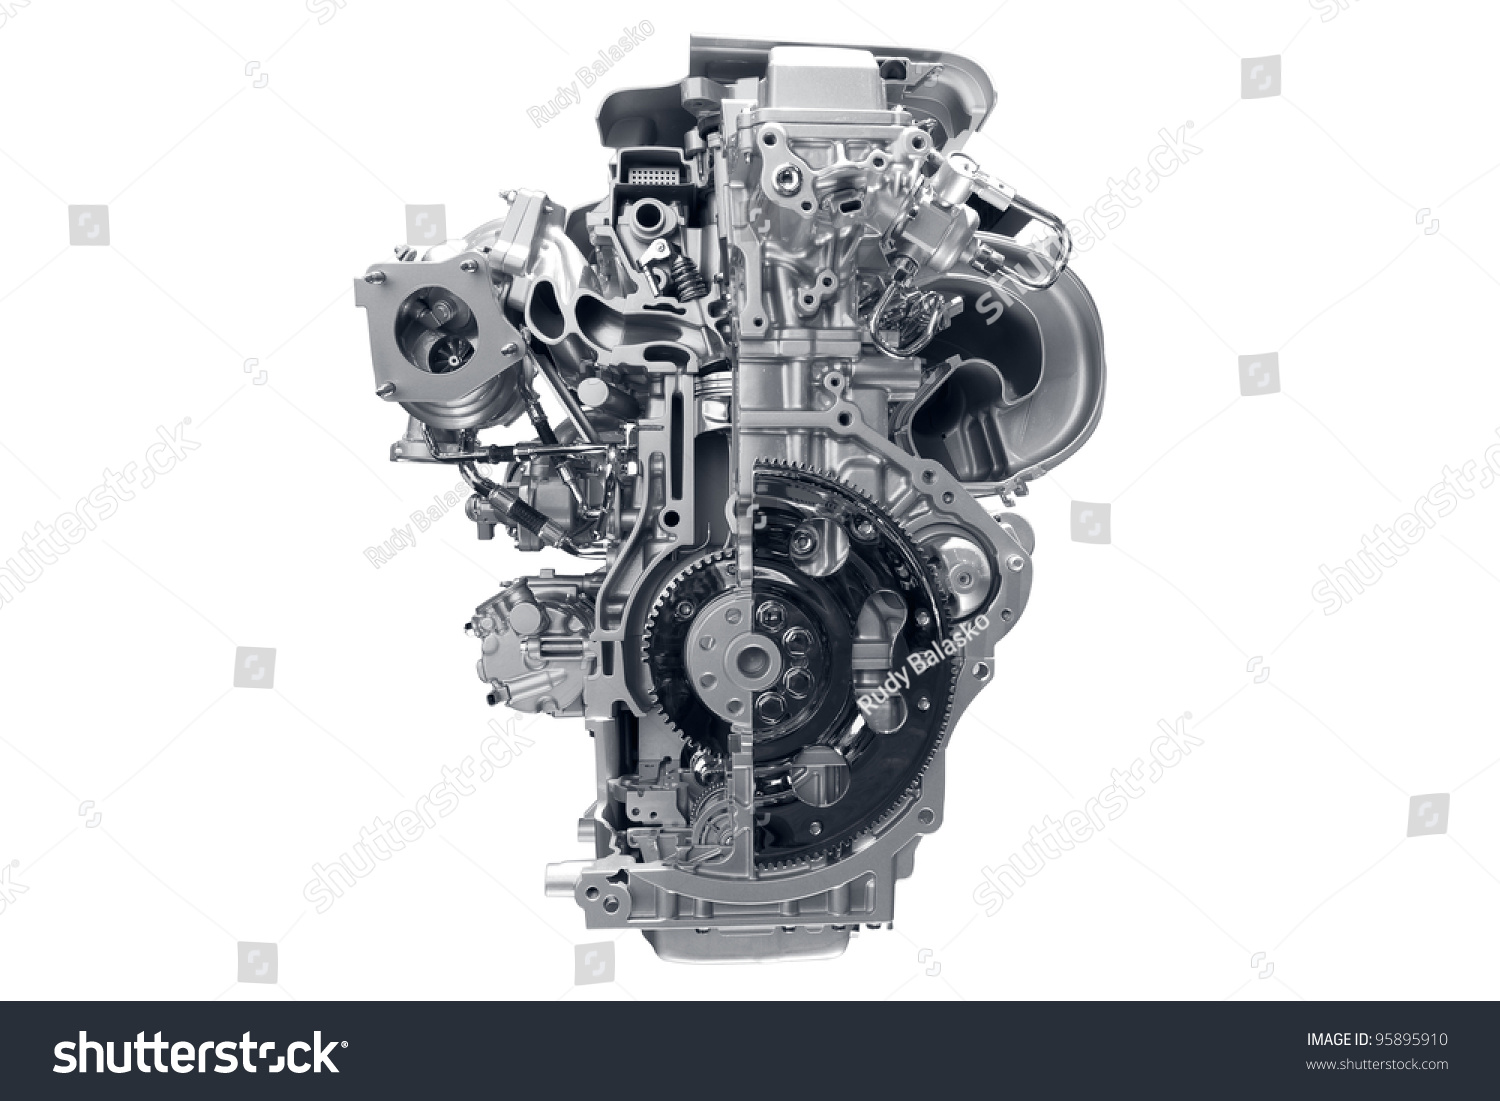 Car engine. Concept of modern car engine isolated on white background. #95895910